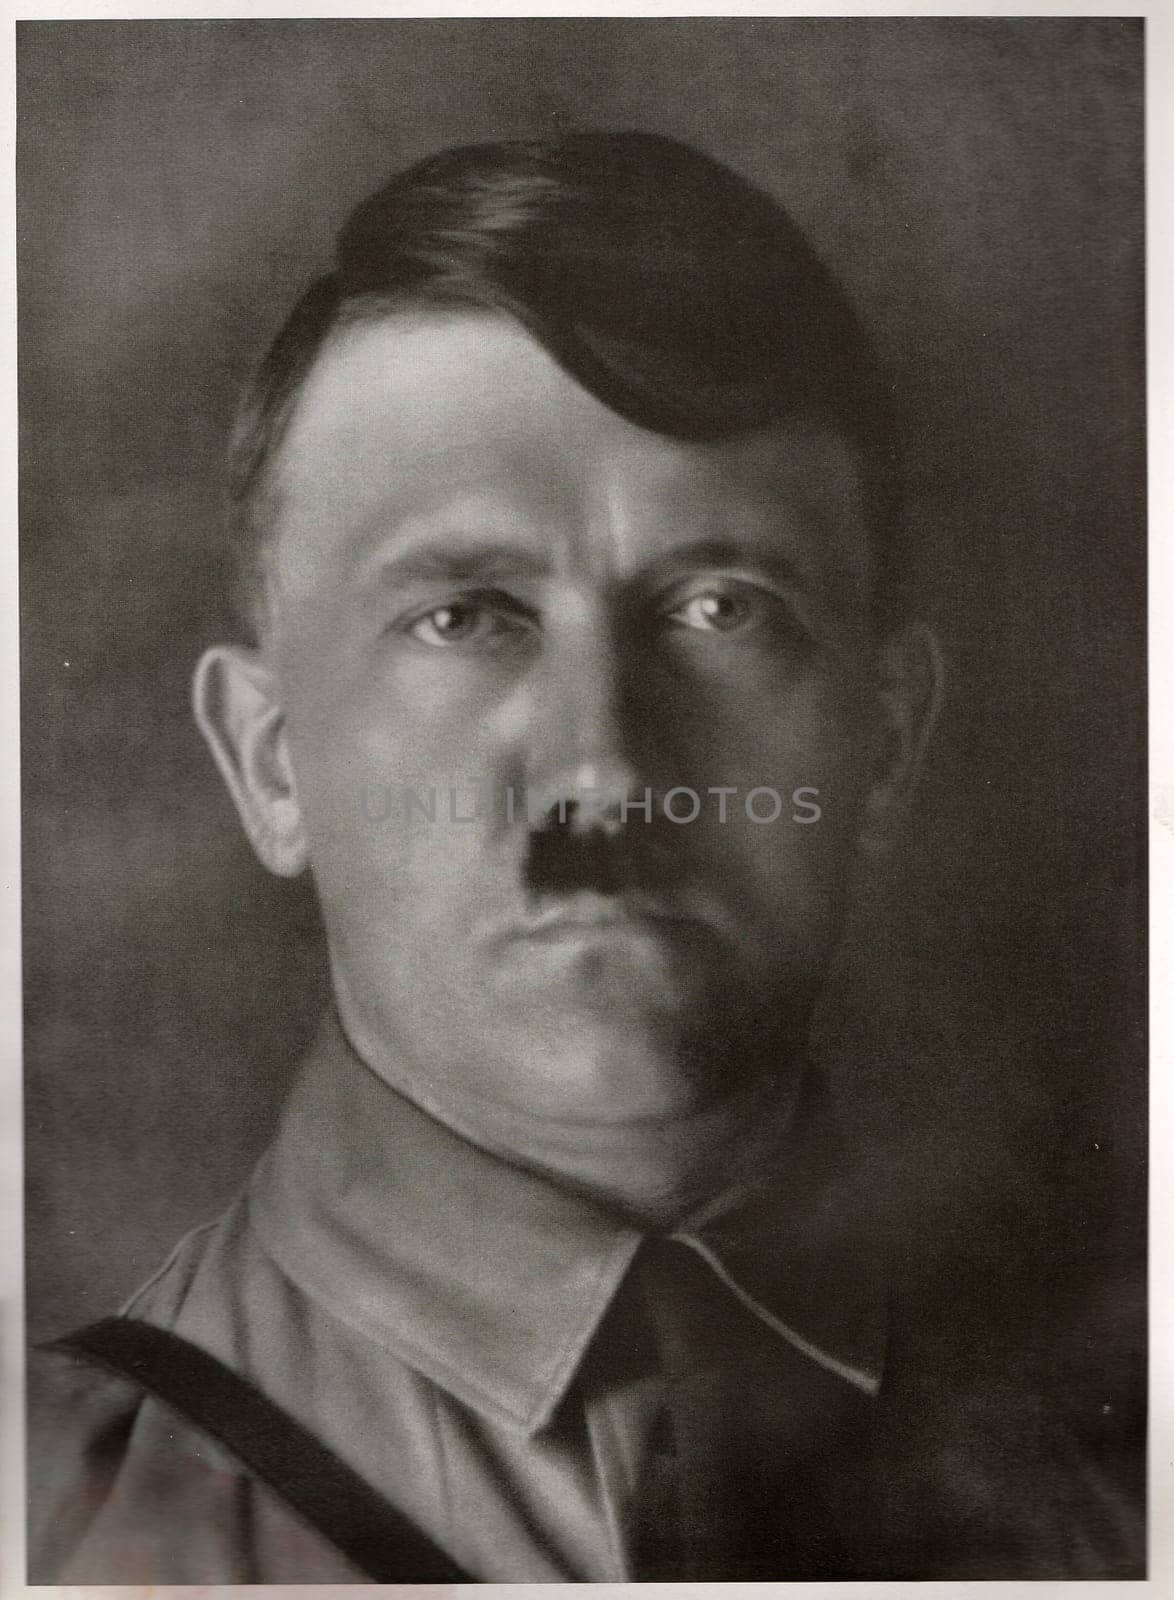 Studio portrait of Adolf Hitler, leader of nazi Germany. Reproduction of antique photo. by roman_nerud